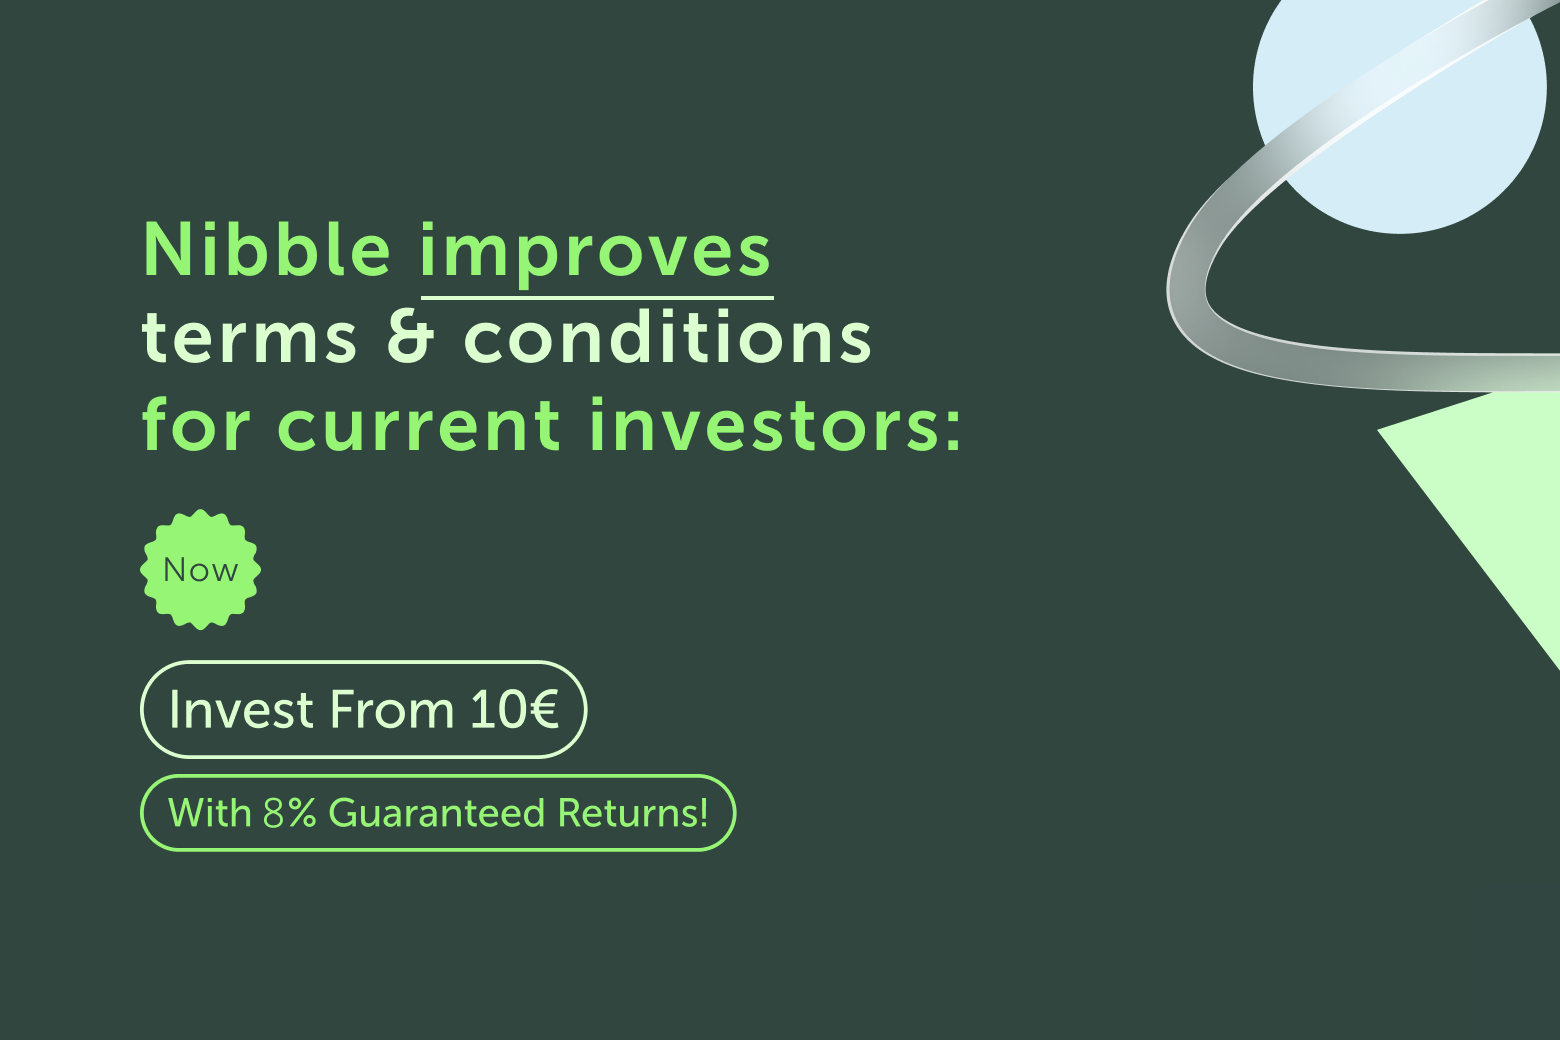 Nibble improves terms & conditions for current investors